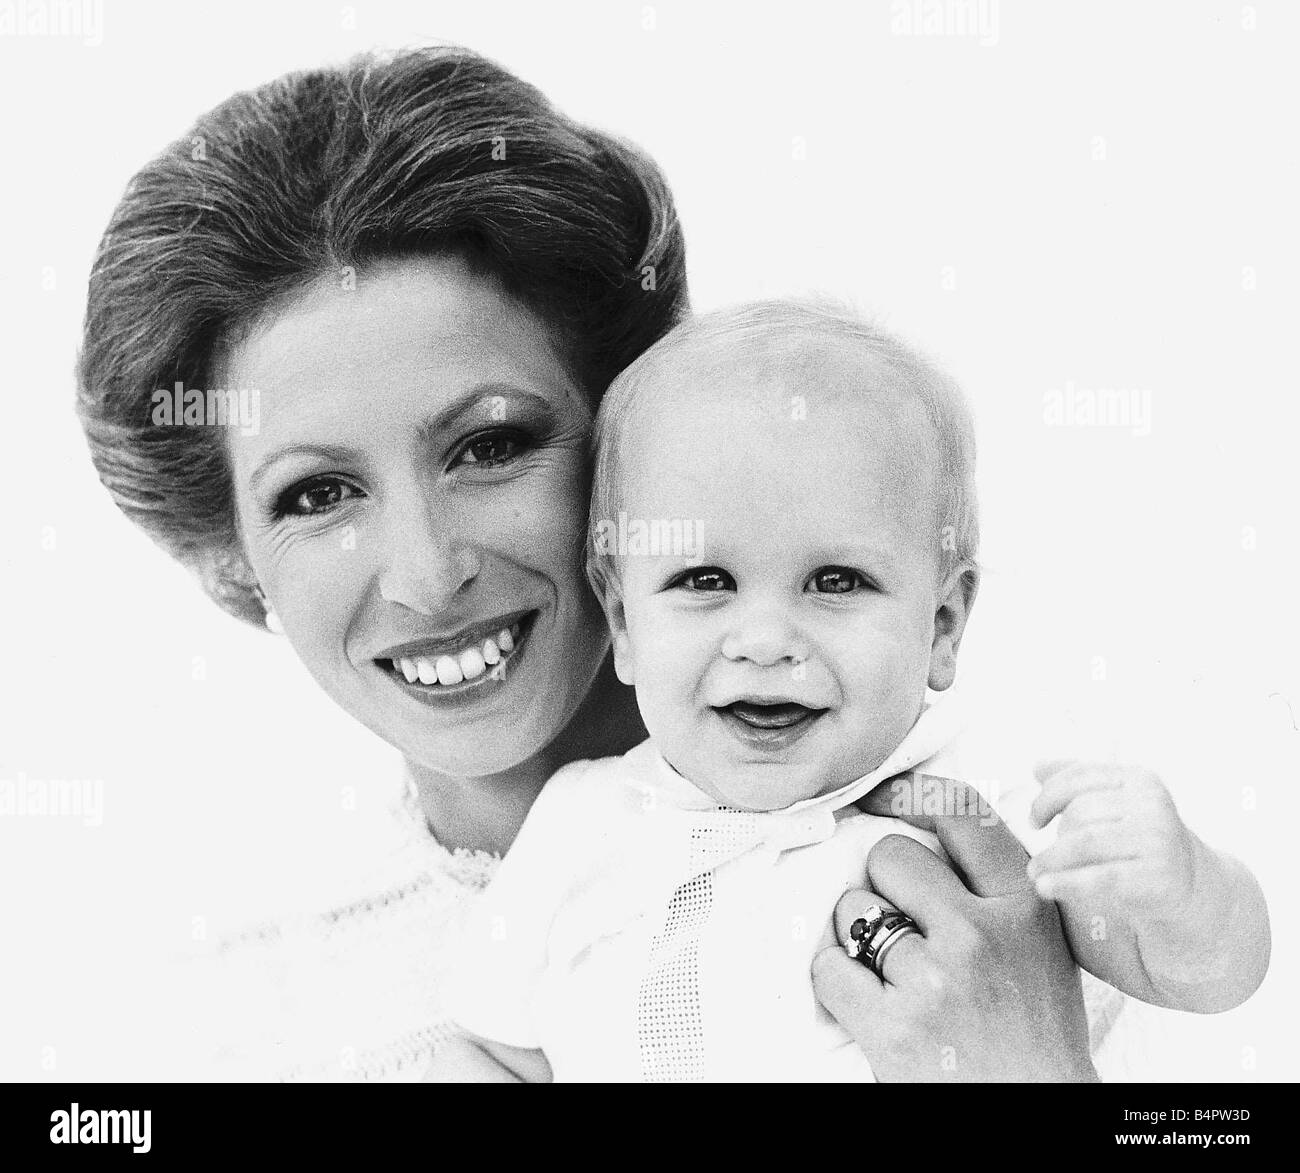 princess-anne-with-her-son-master-peter-phillips-august-1978-B4PW3D.jpg